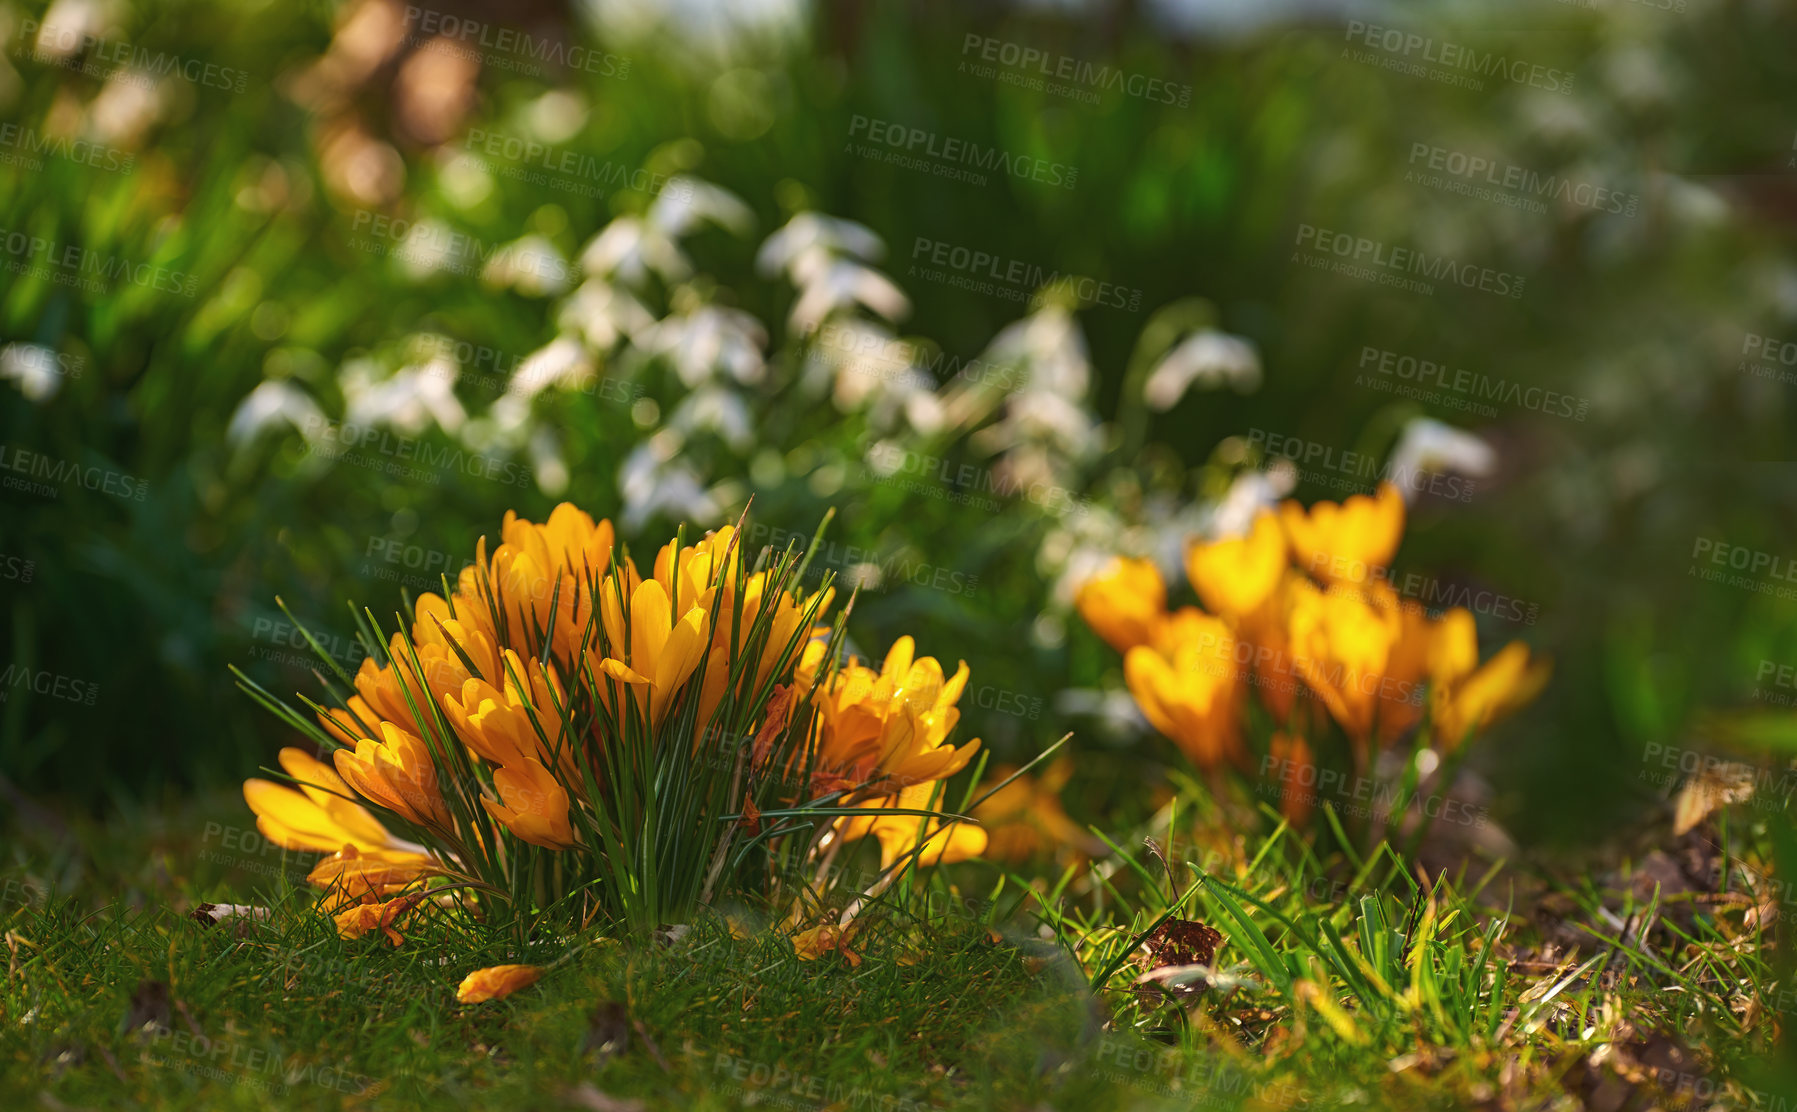 Buy stock photo Beautiful yellow crocus in bloom. Pretty flowers growing in an open field or meadow in a public park or formal garden. Plants budding, sprouting and growing. Beauty in nature during spring or summer